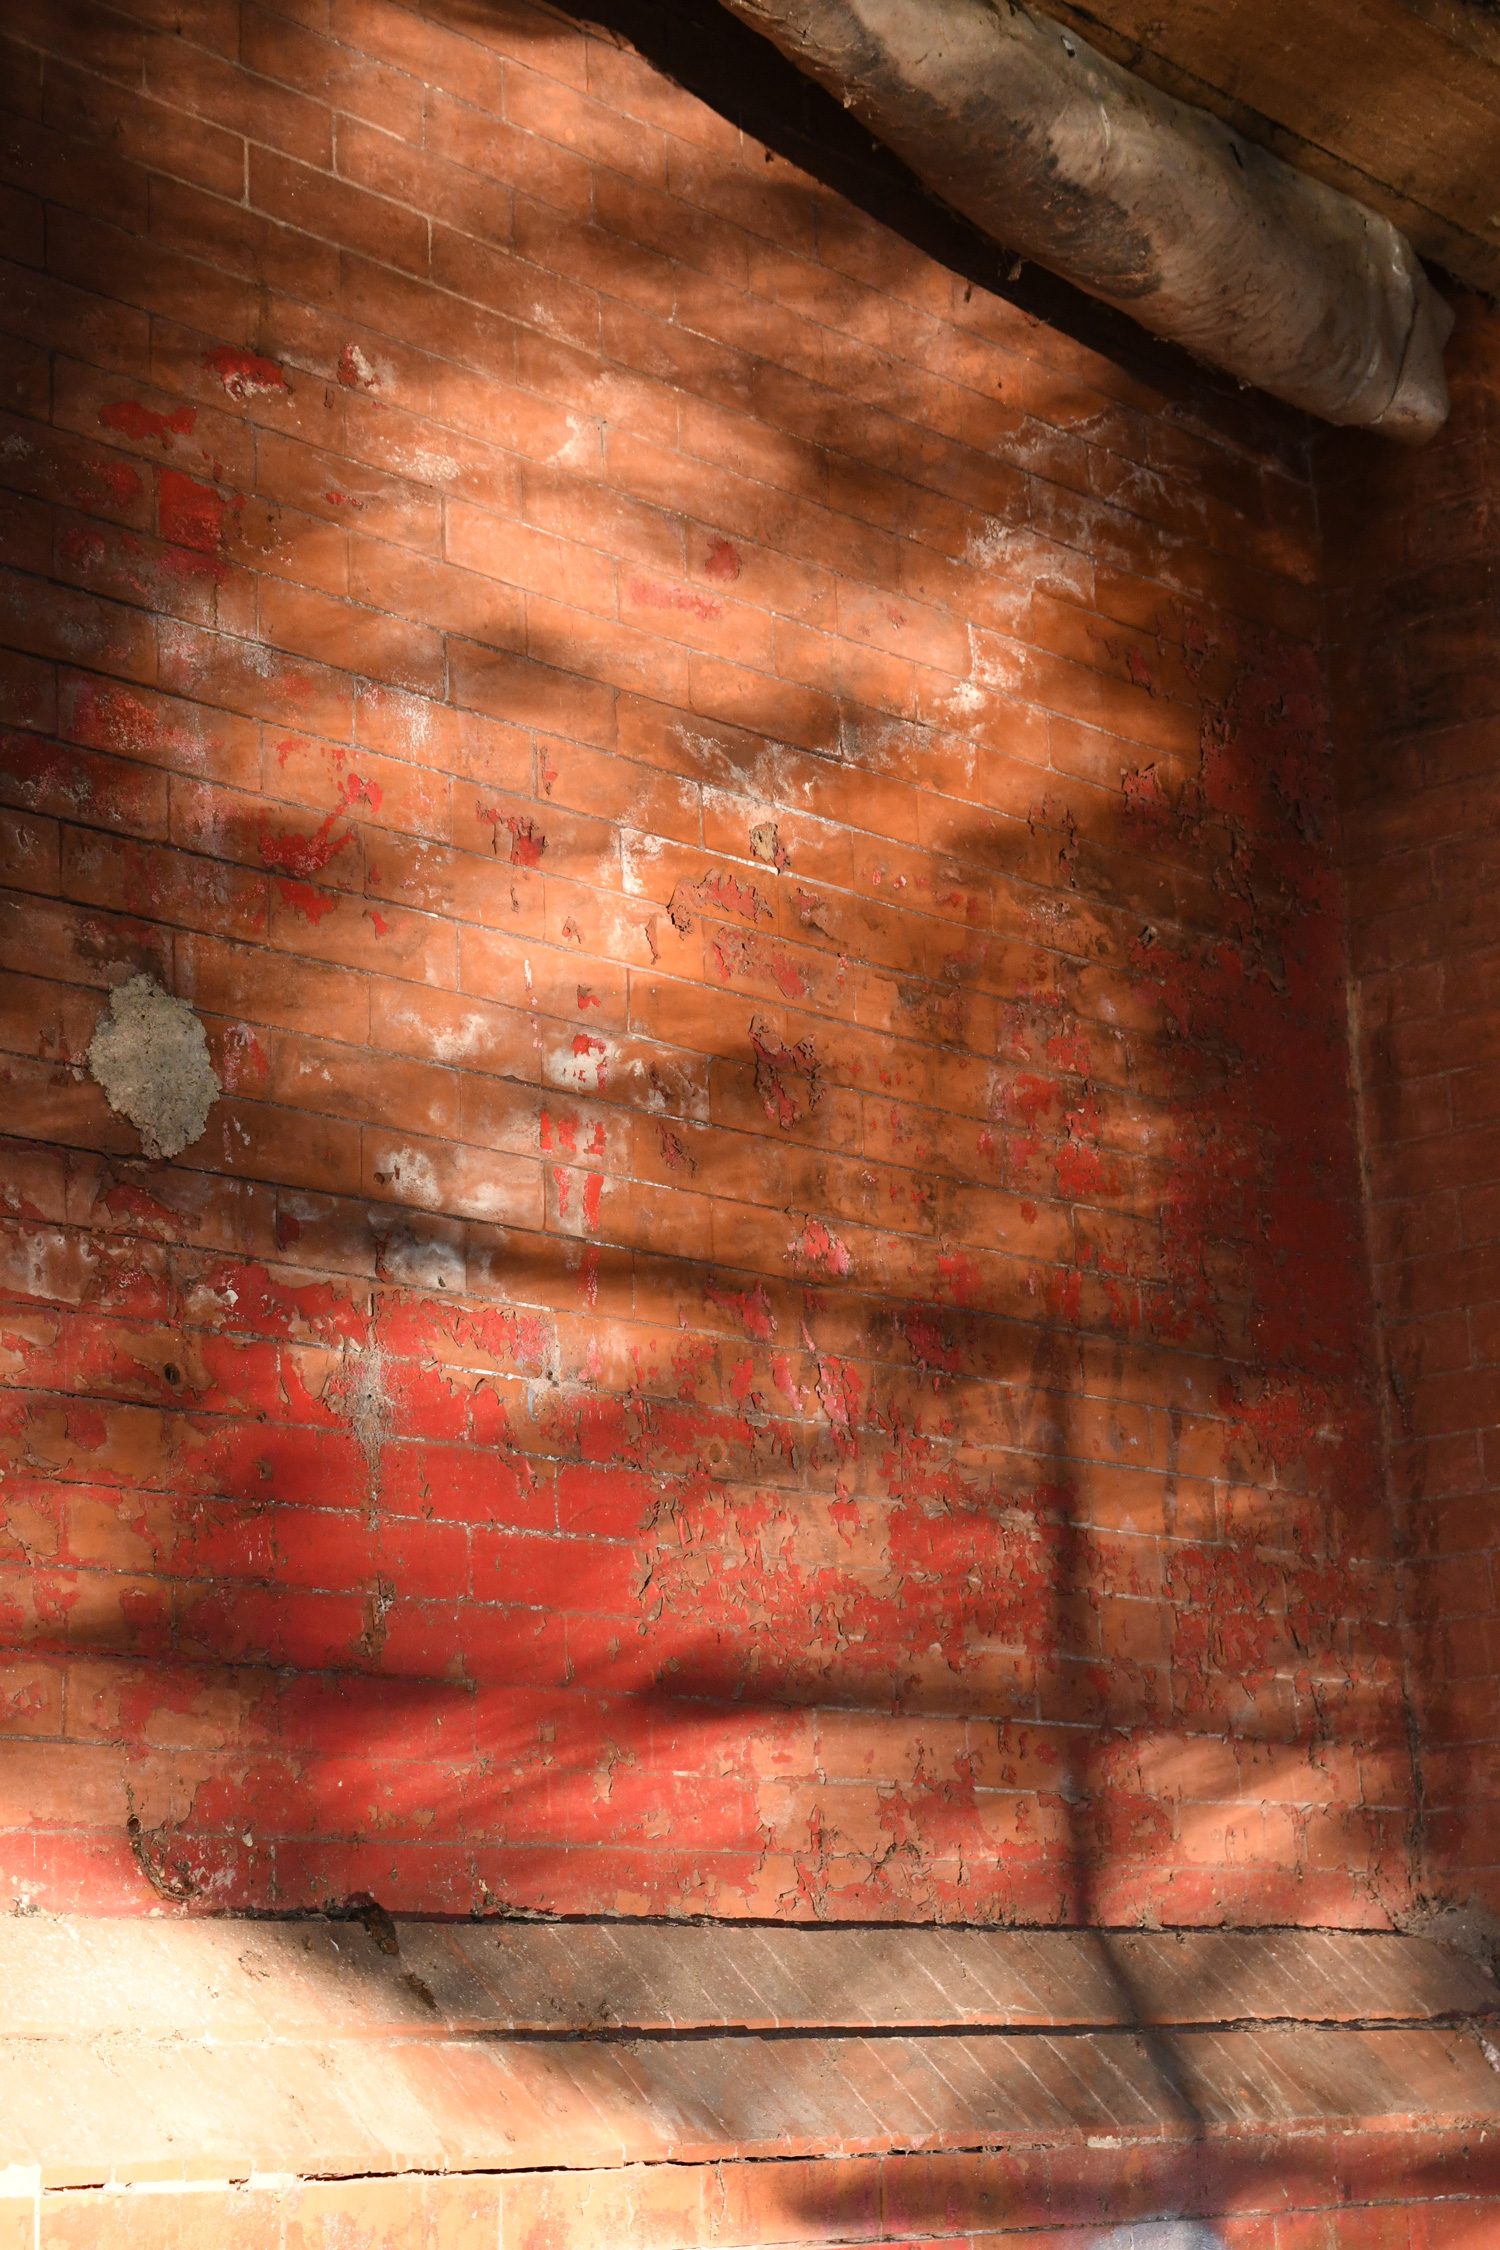 Light reflected off of water onto brick, Prospect Park